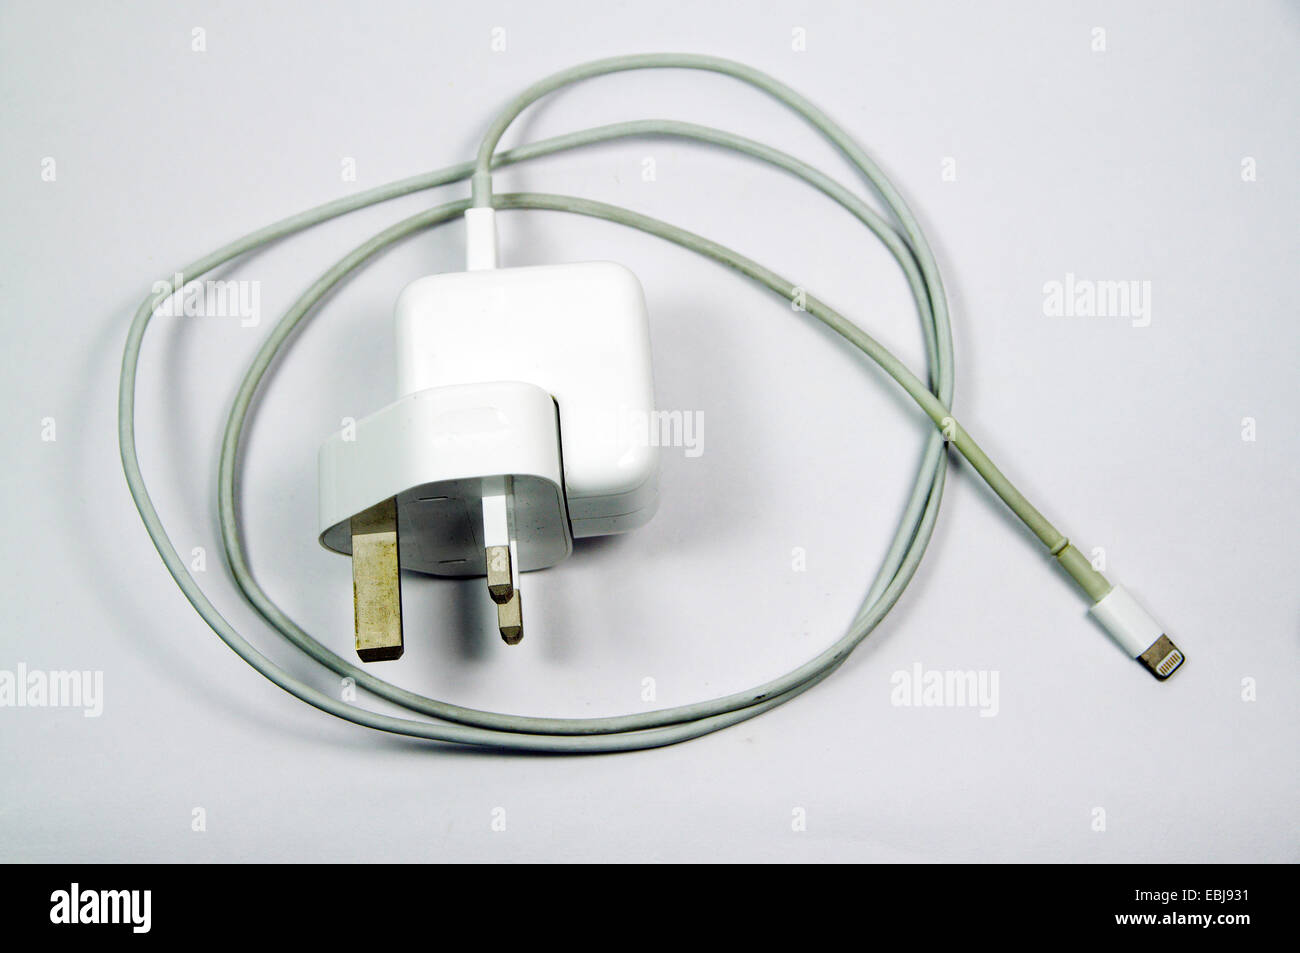 Ipod, Ipad cable and adaptor new version Stock Photo